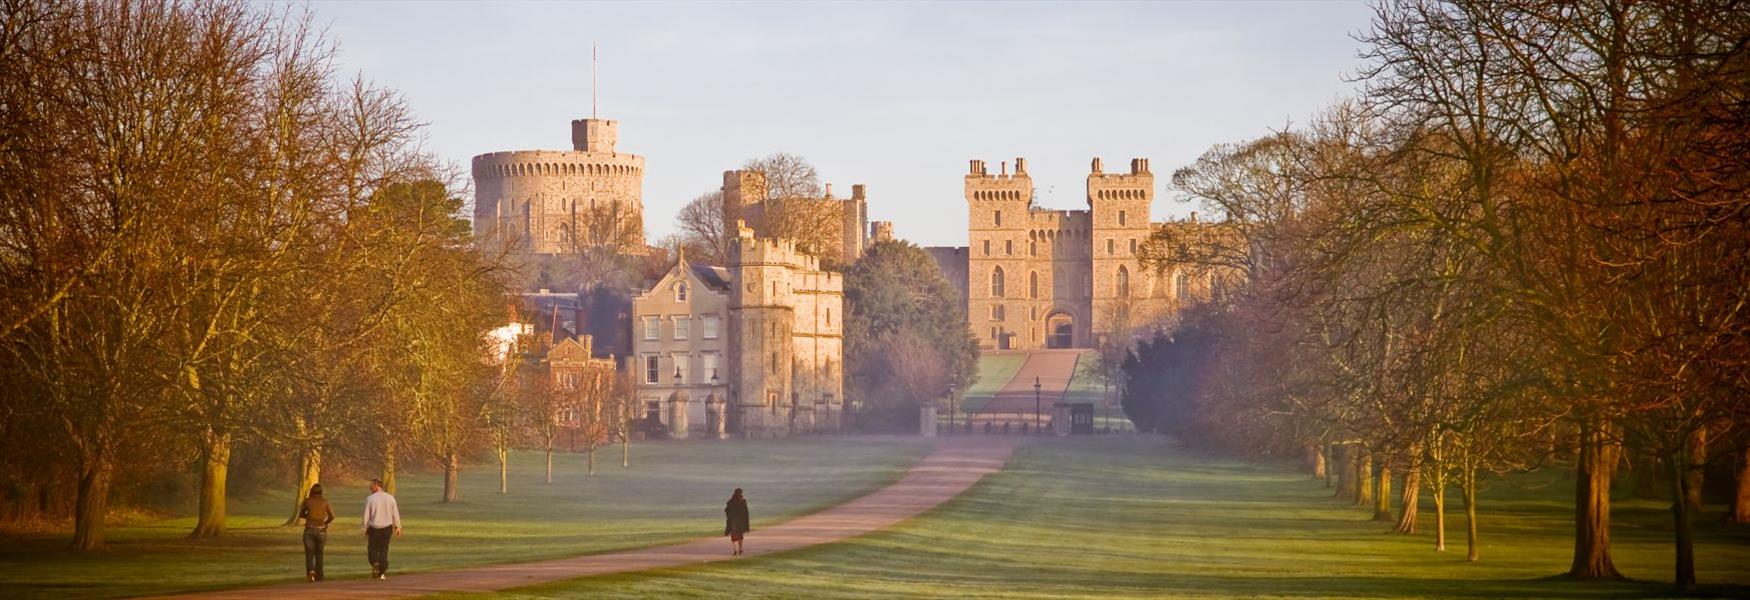 Windsor Castle and the Long Walk, photographed by Doug Harding